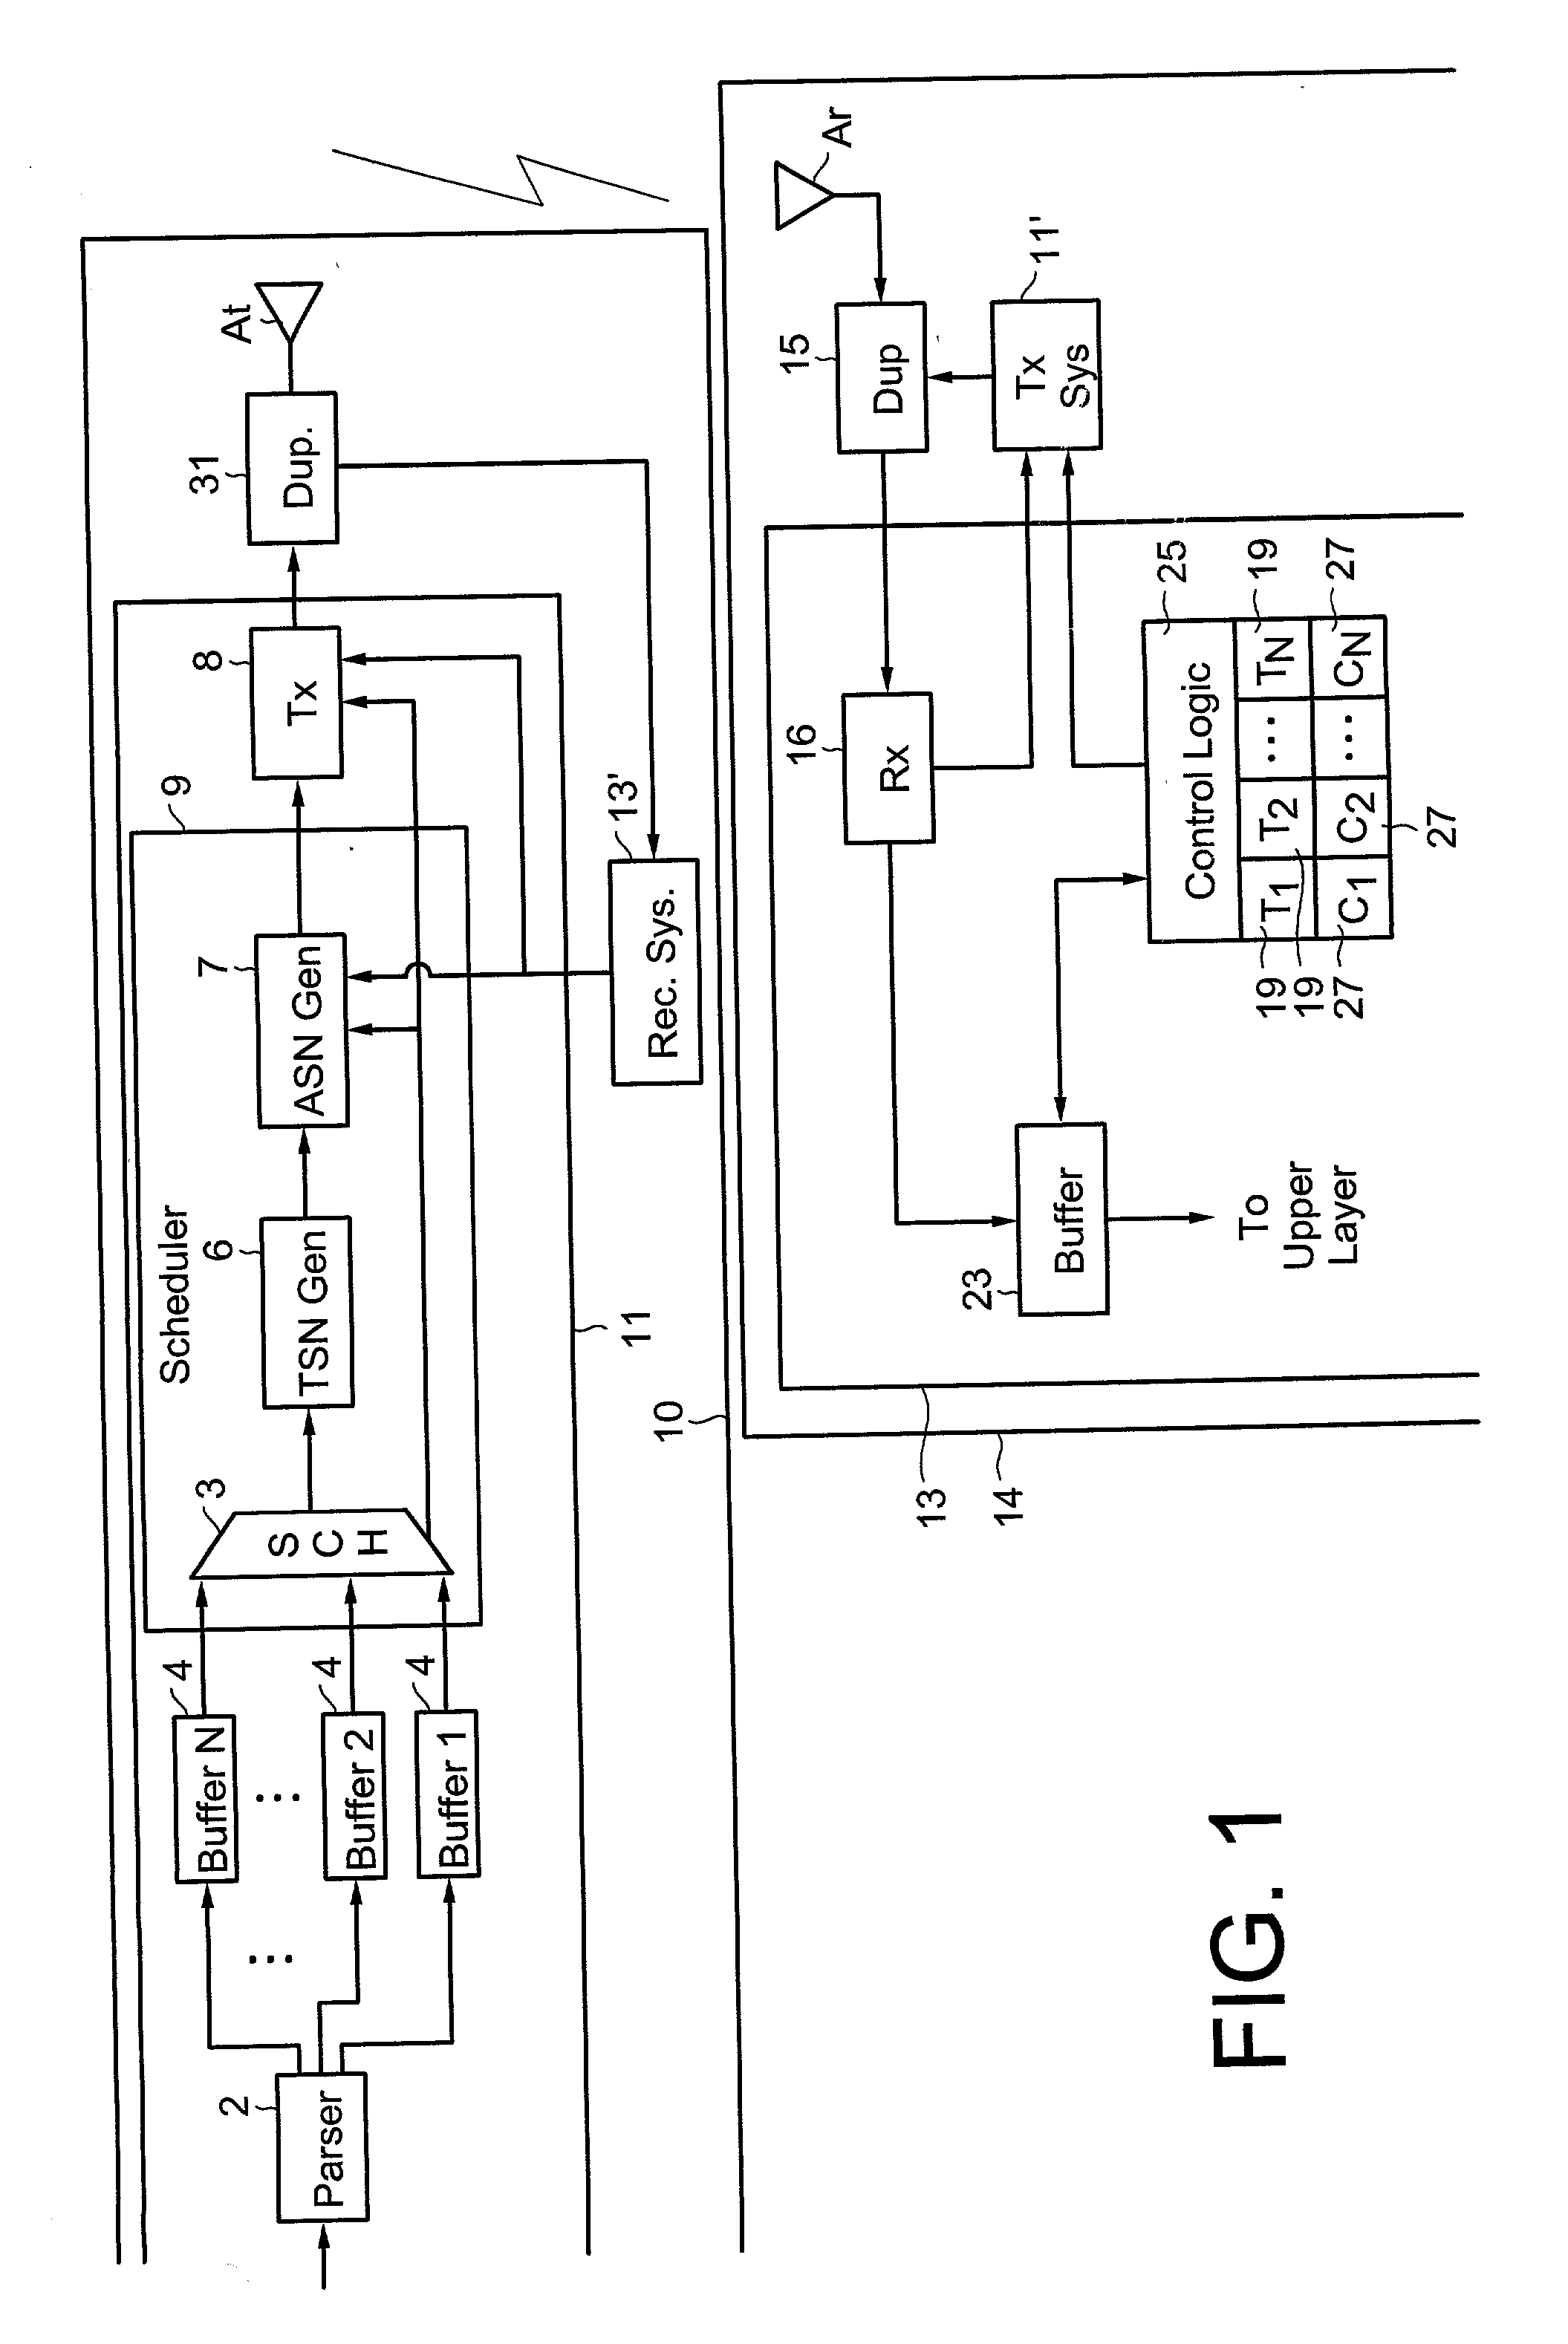 Method and apparatus for transmitting and receiving data packets to avoid stall during re-sequencing of data packets